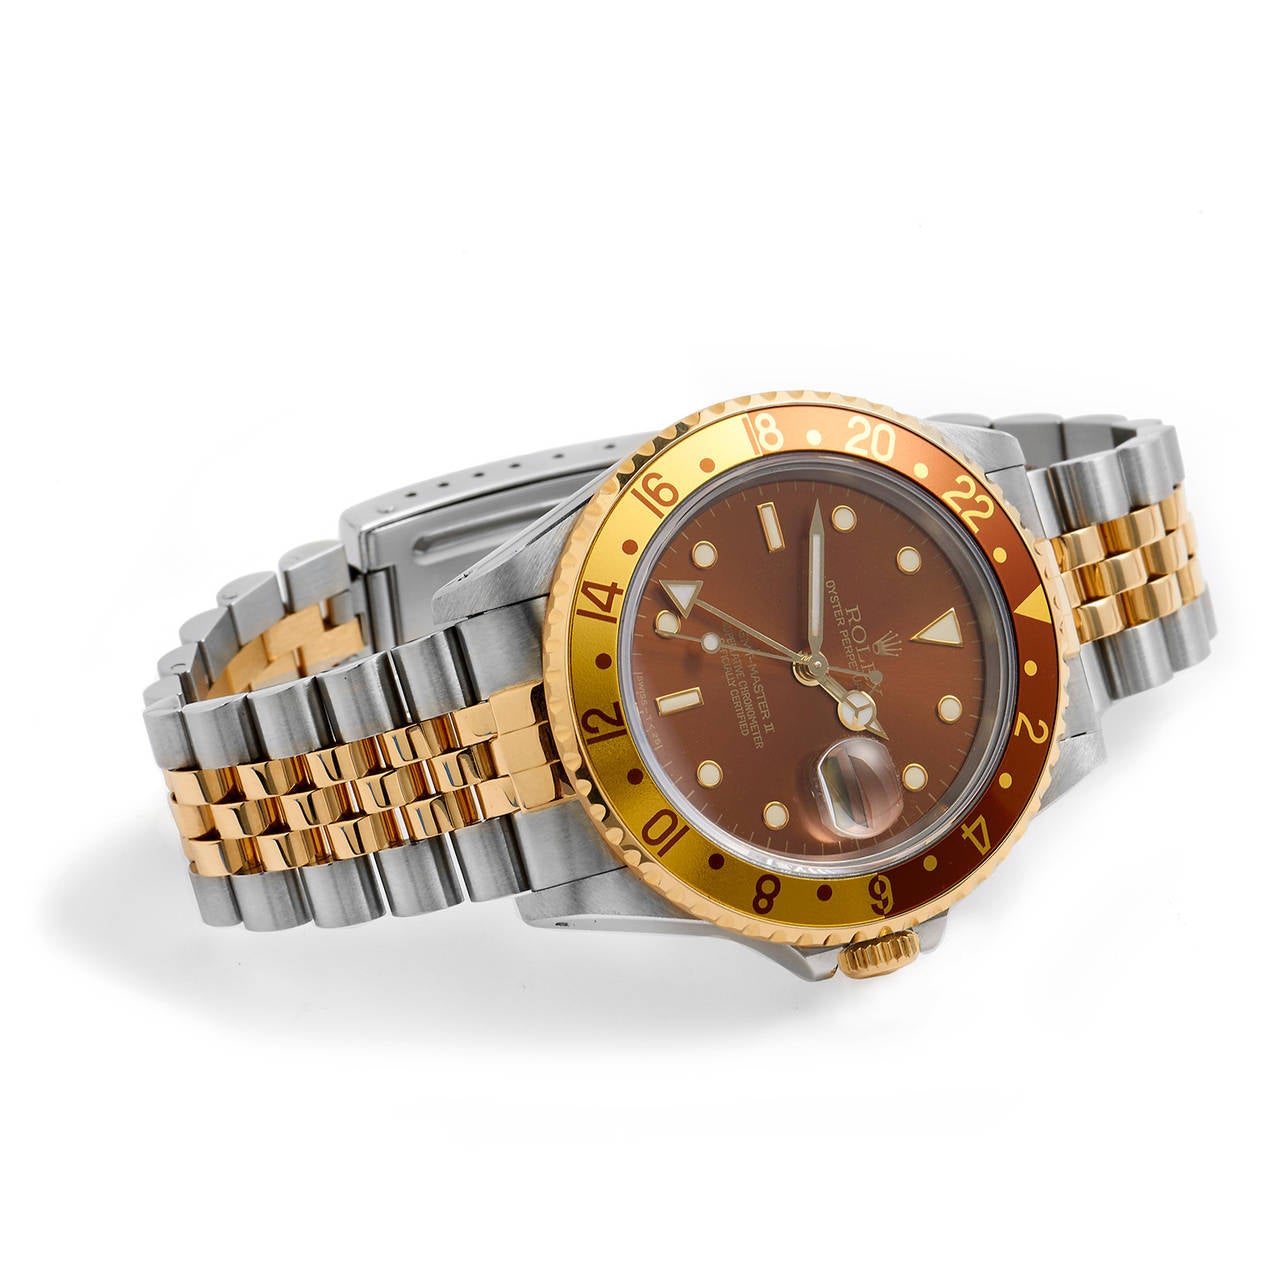 Similar to the popularity of Clint Eastwood’s Academy Award winning performances, this Rolex model is an unparalleled crowd pleaser. Often referred to as the Clint Eastwood model or Root Beer GMT Master 2, this rare Rolex features his iconic look as